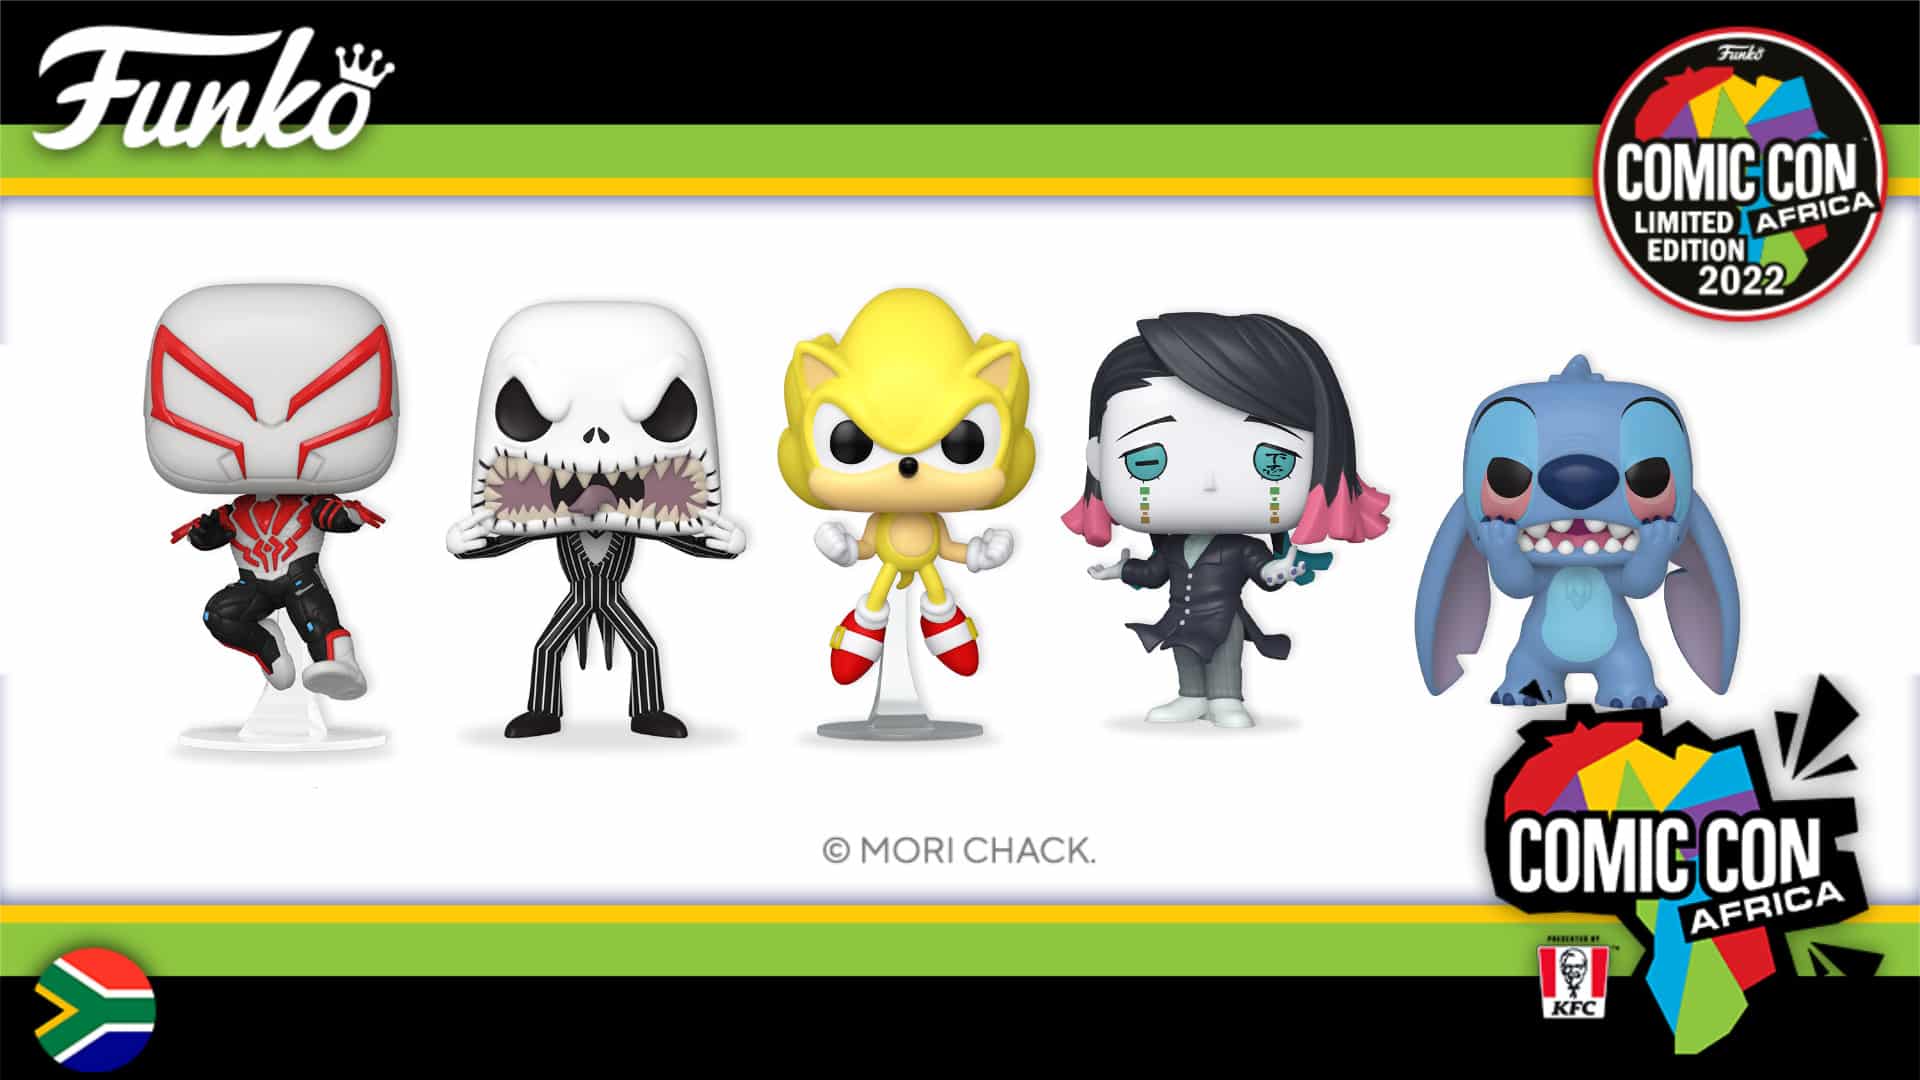 All The Comic Con Africa 2022 Funko Pops and Prices